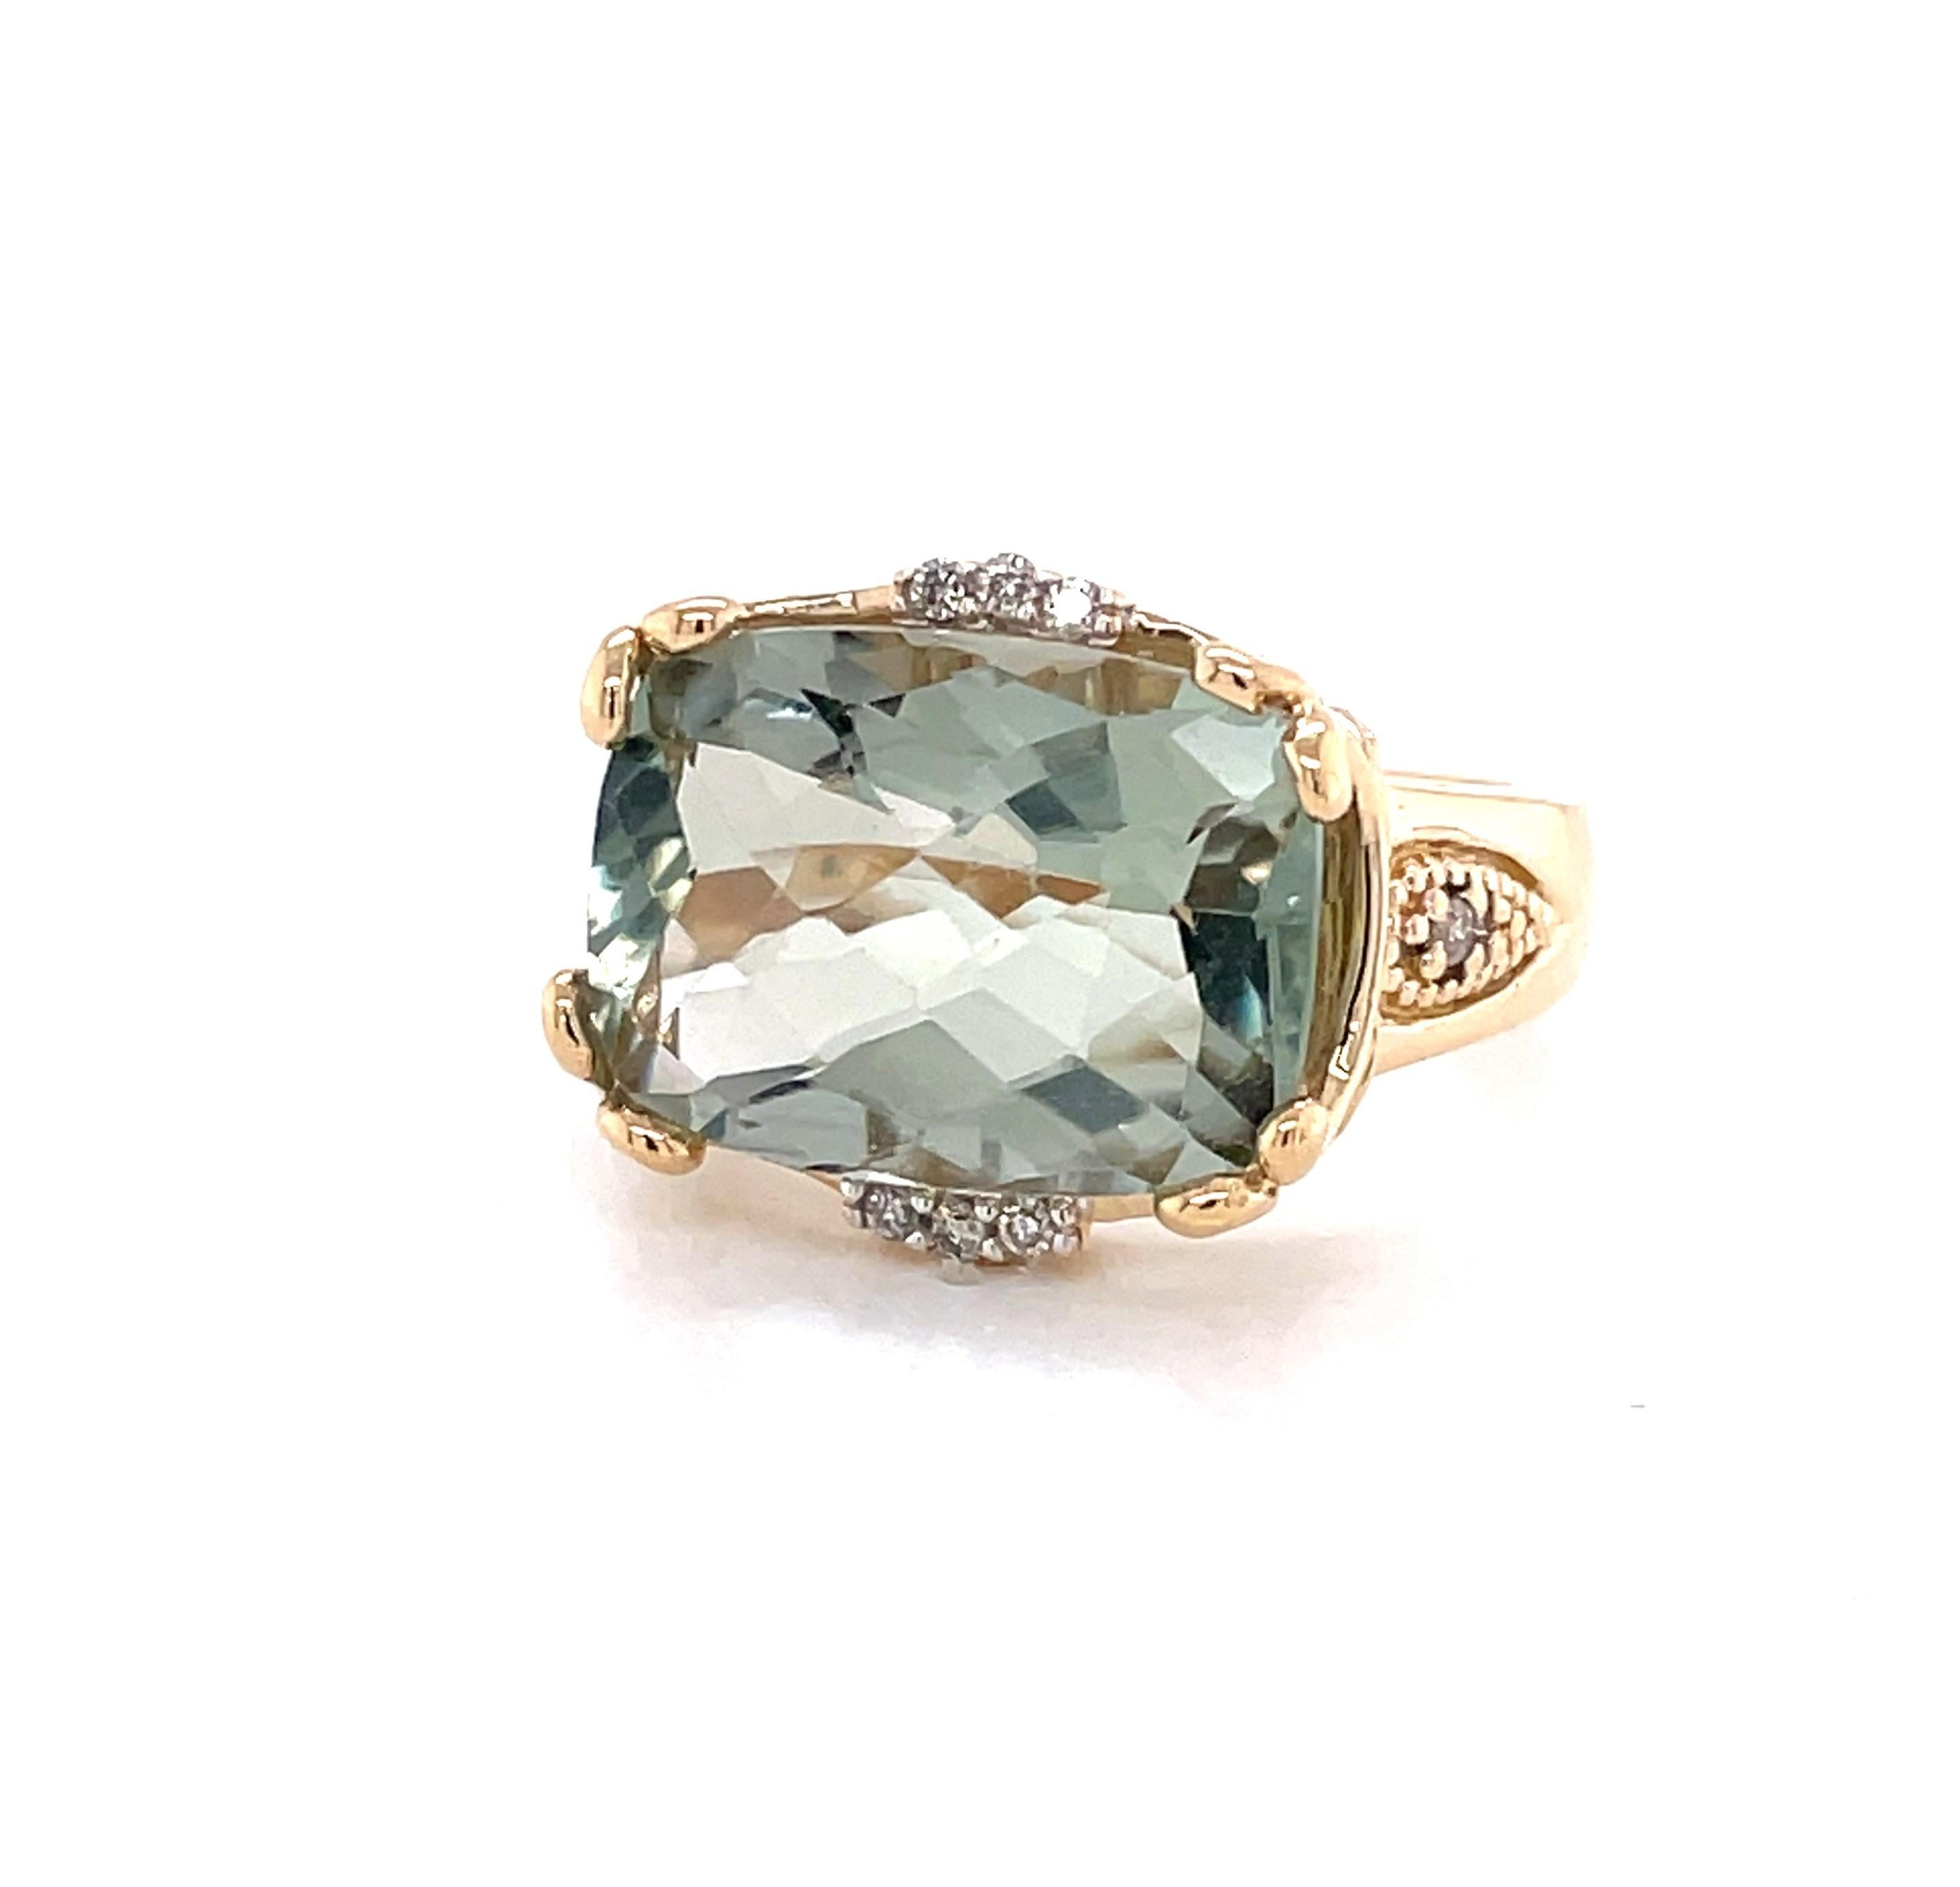 5 Carat Green Amethyst 14 Karat Cocktail Ring with Diamond Accents 4